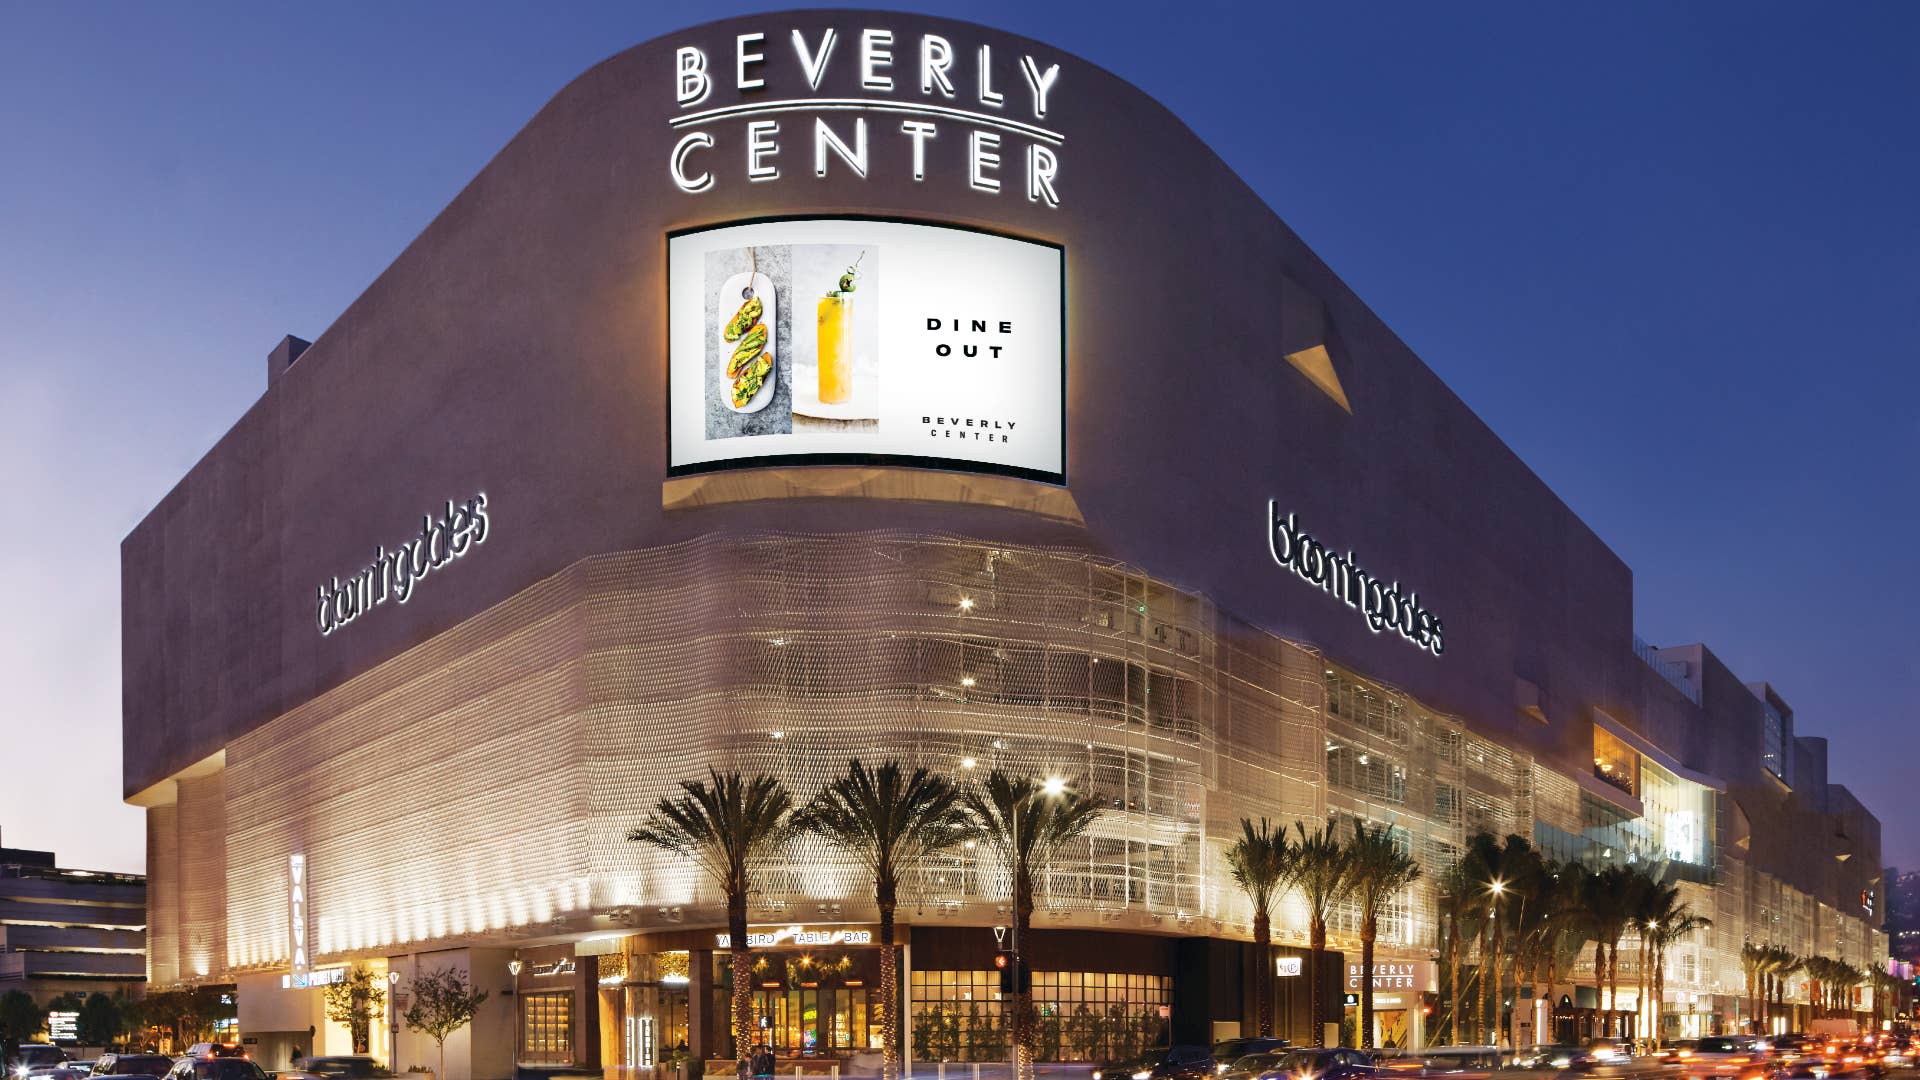 The illuminated Beverly Center is pictured